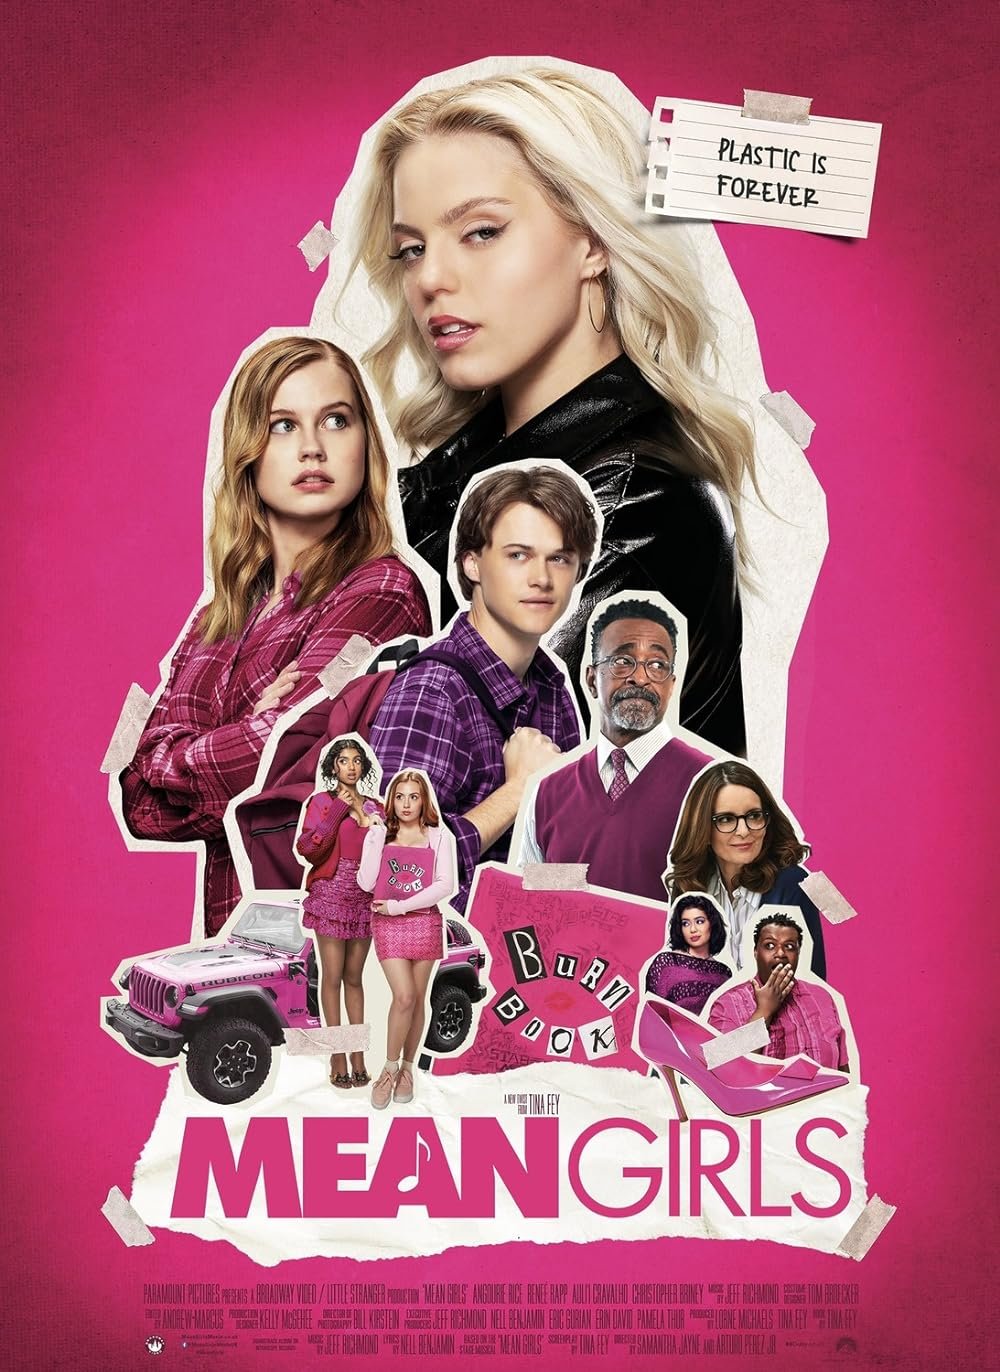 Get In Loser, It’s A Mean Girls Review